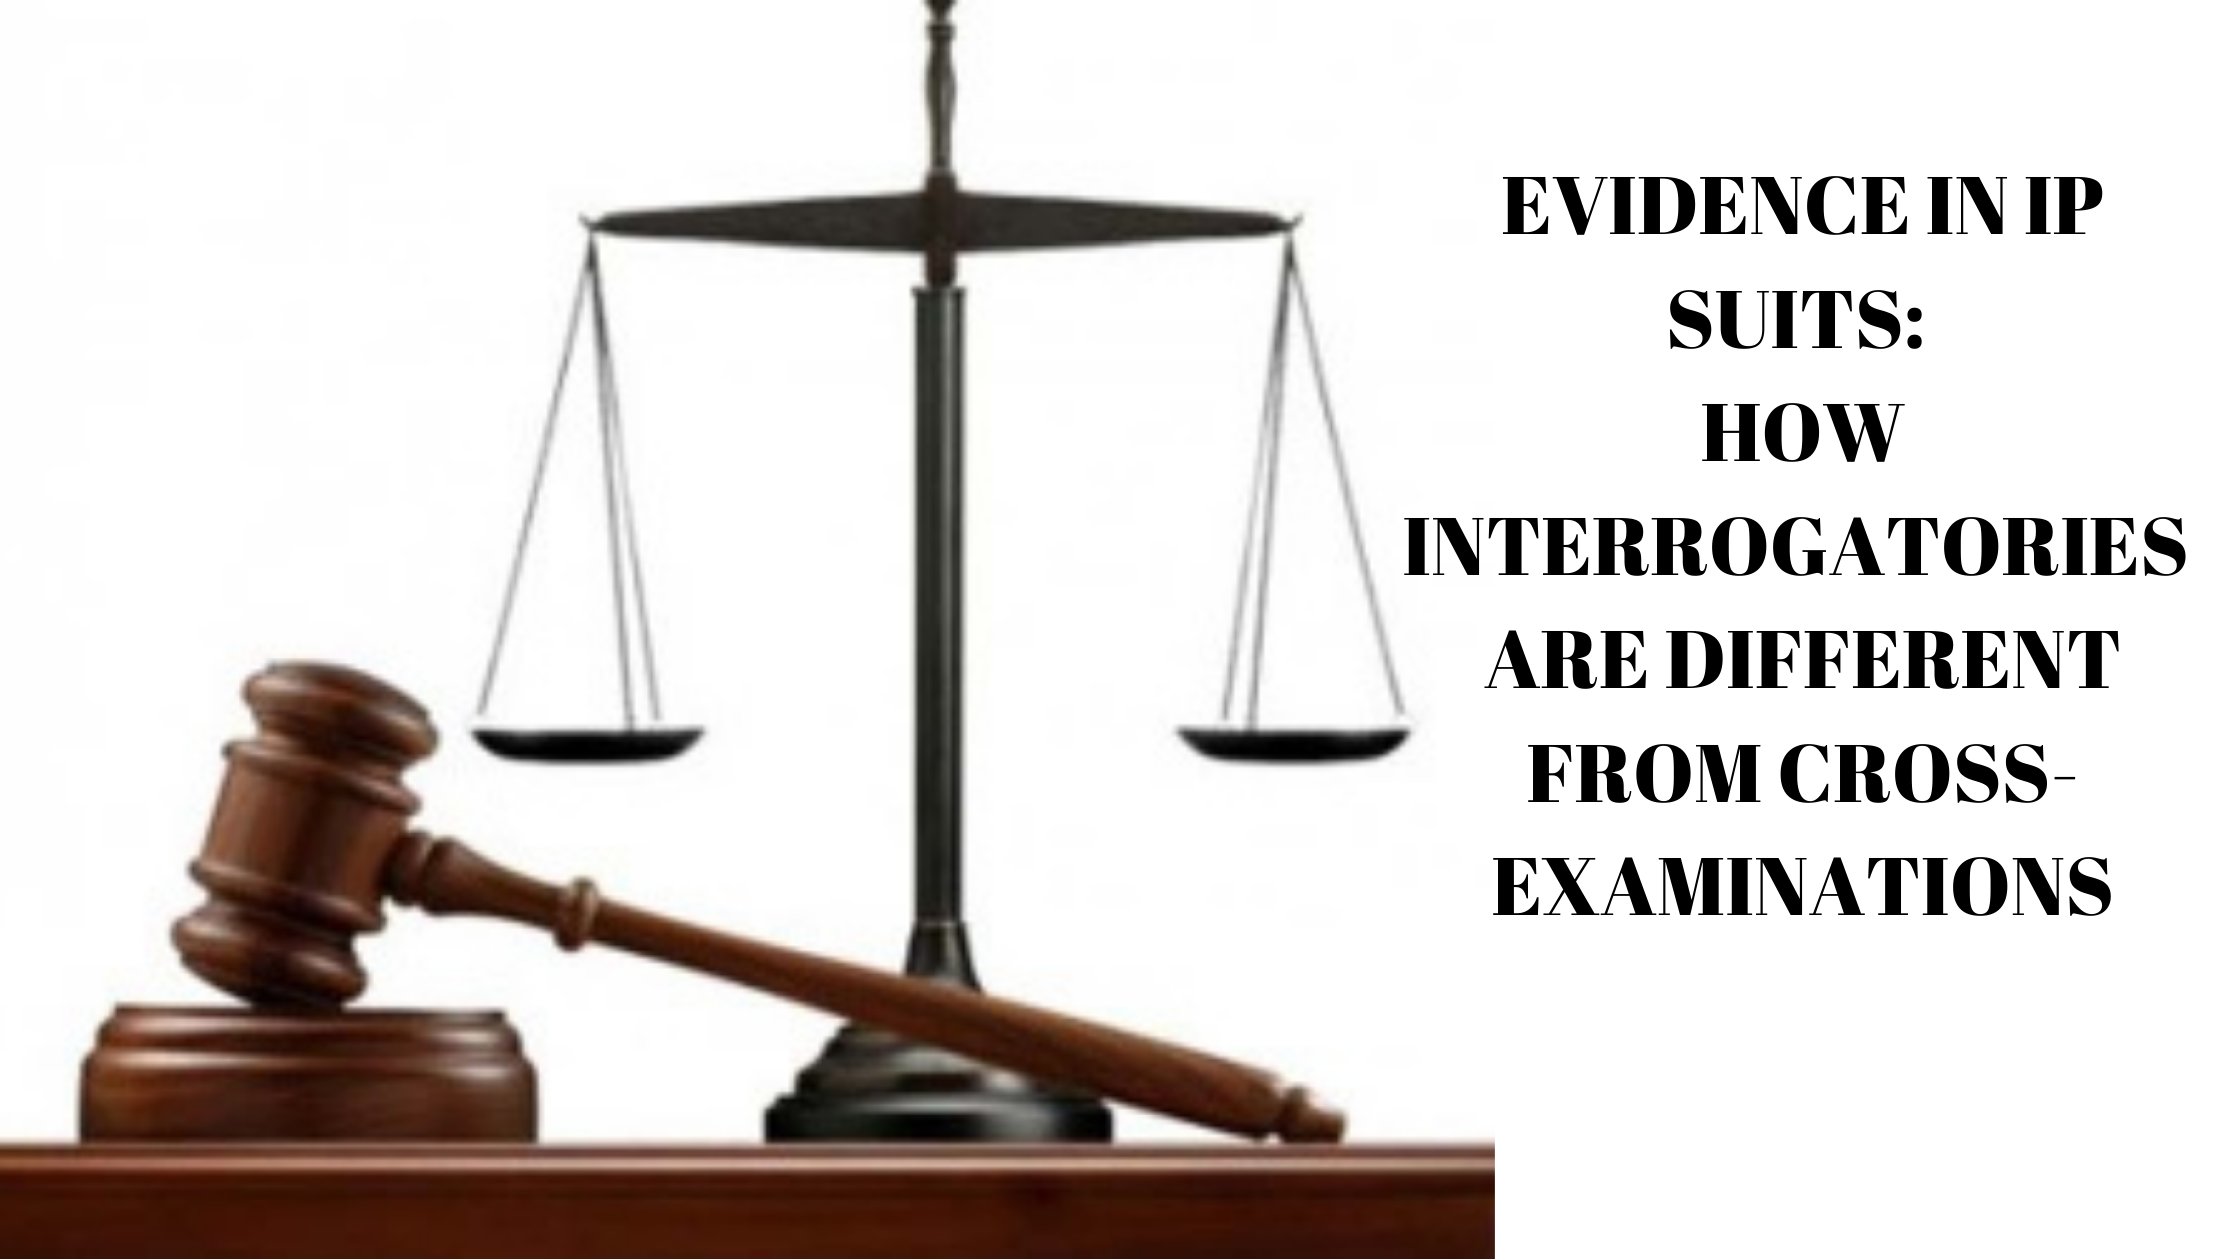 EVIDENCE IN IP SUITS: HOW INTERROGATORIES ARE DIFFERENT FROM CROSS-EXAMINATIONS